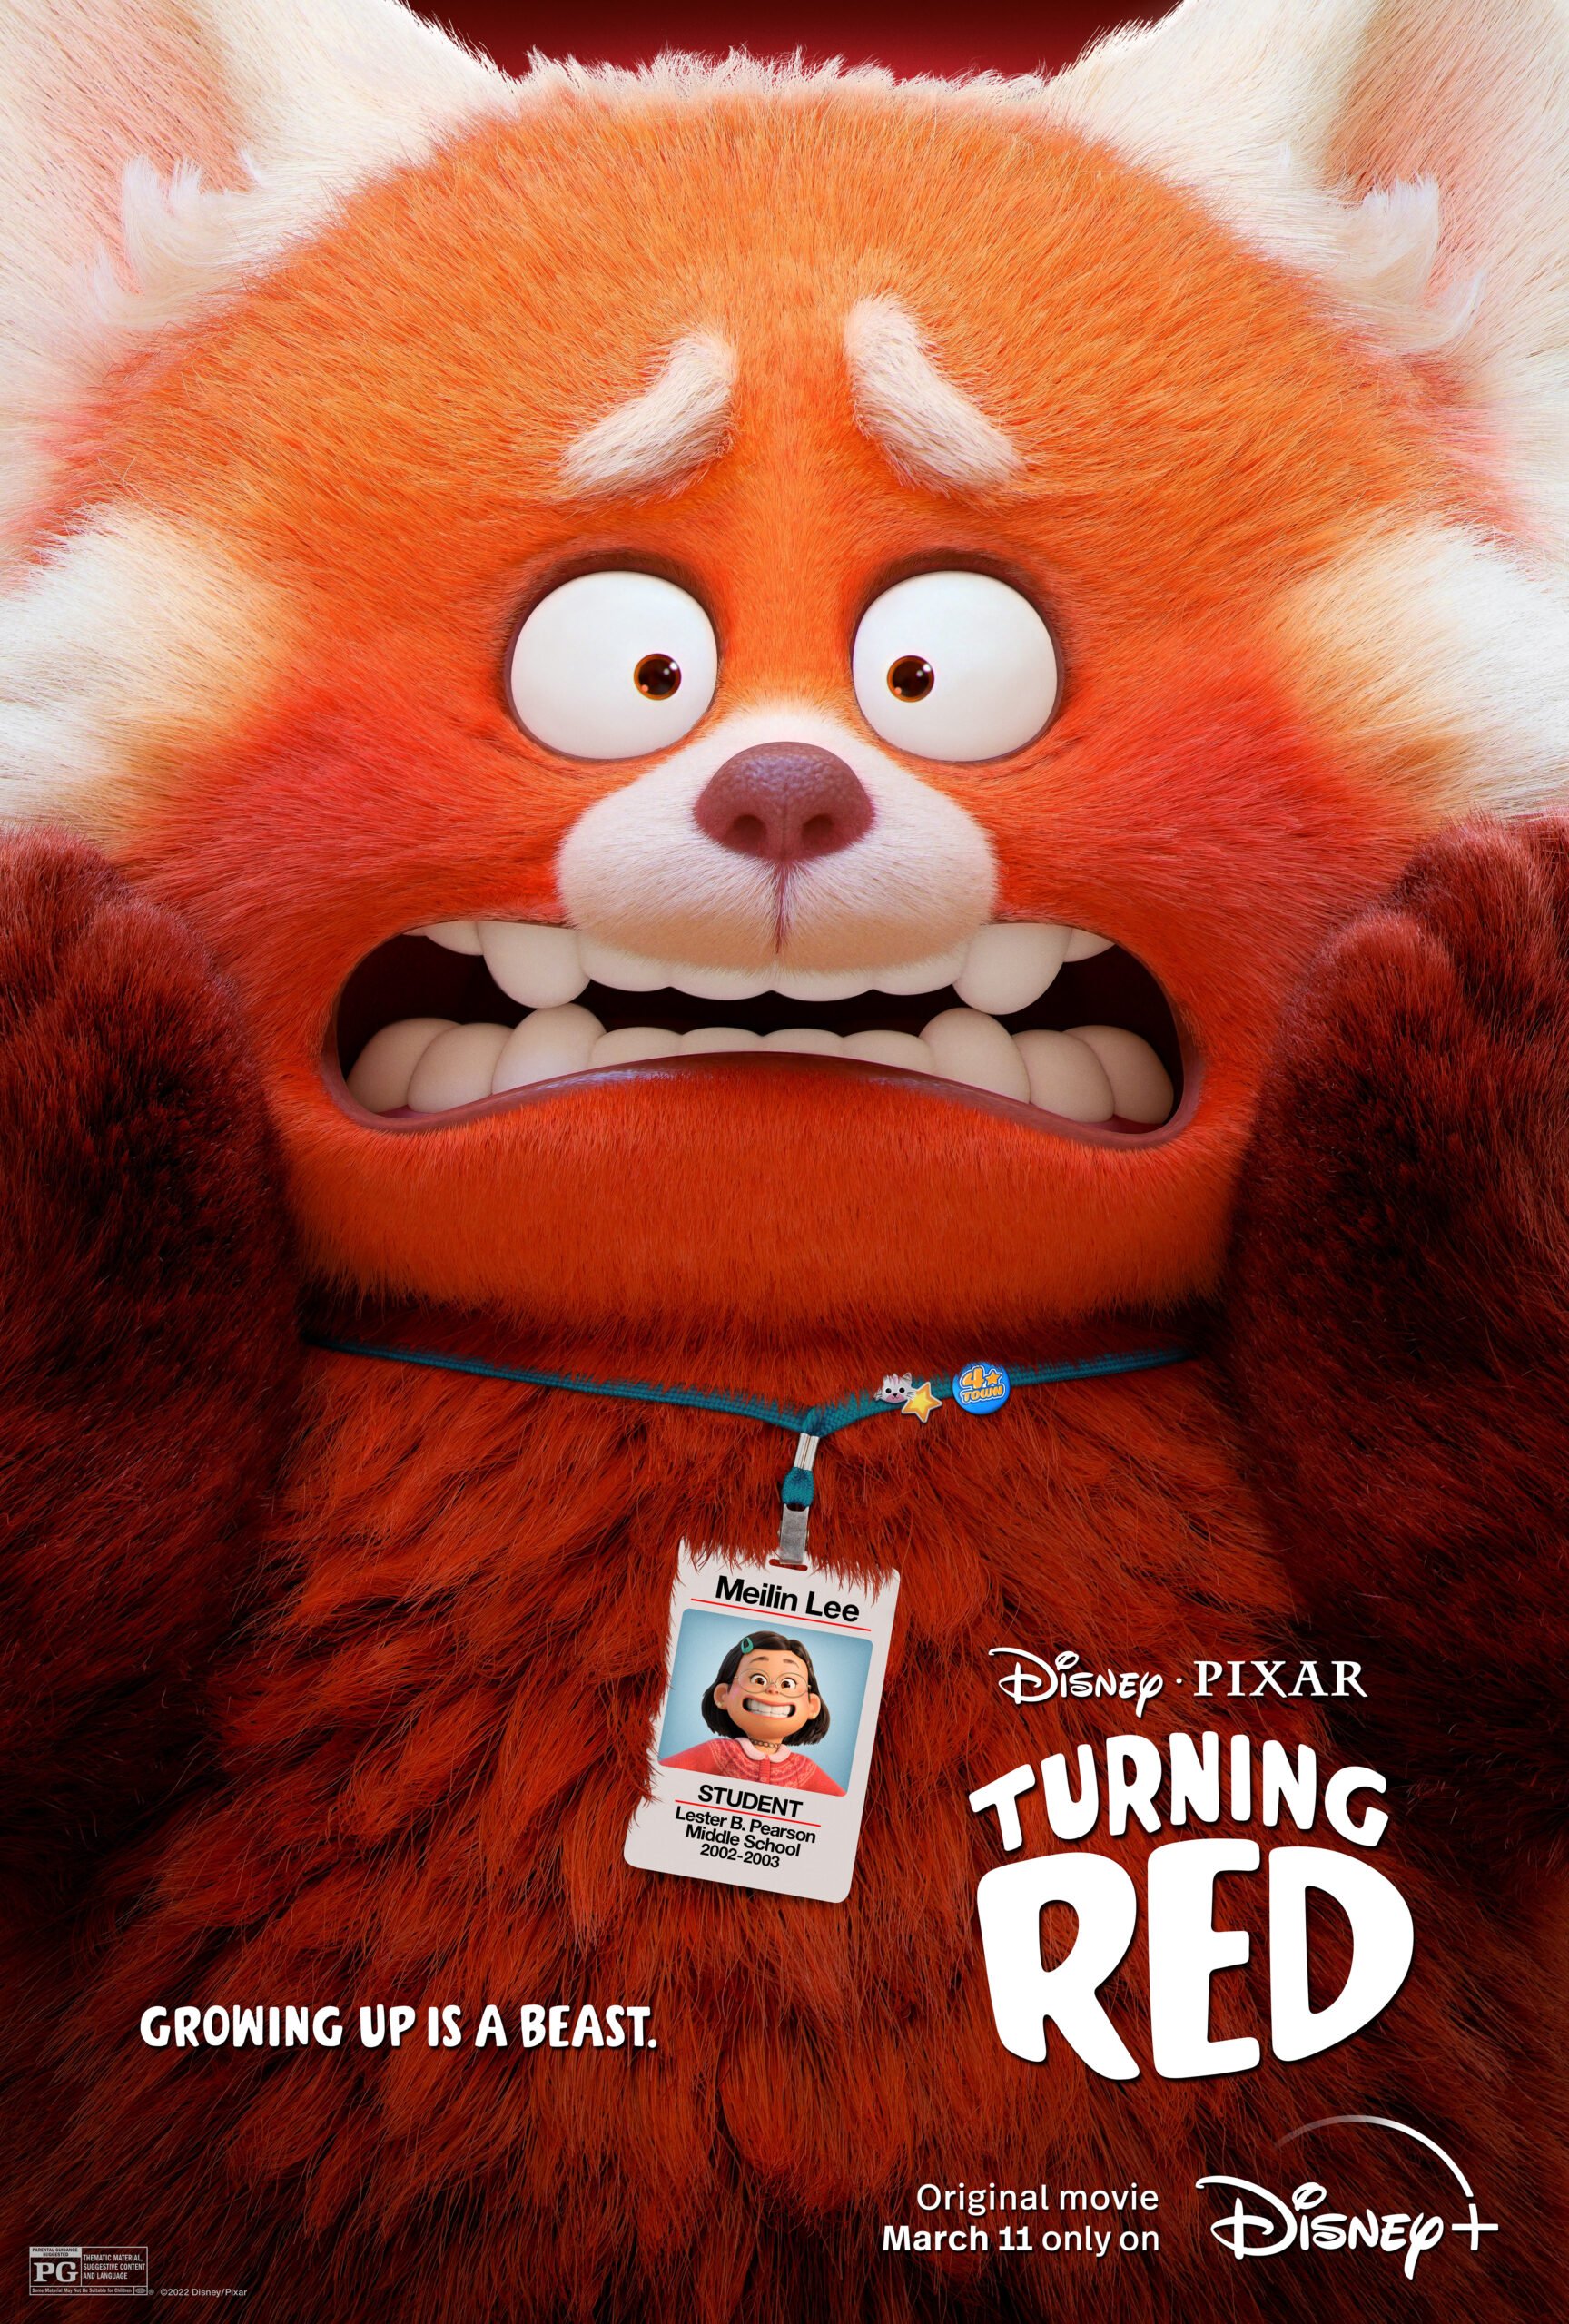 Are you gearing up to watch Pixar's latest release? This Turning Red review from each member of the family will help you decide what ages the movie is best for!